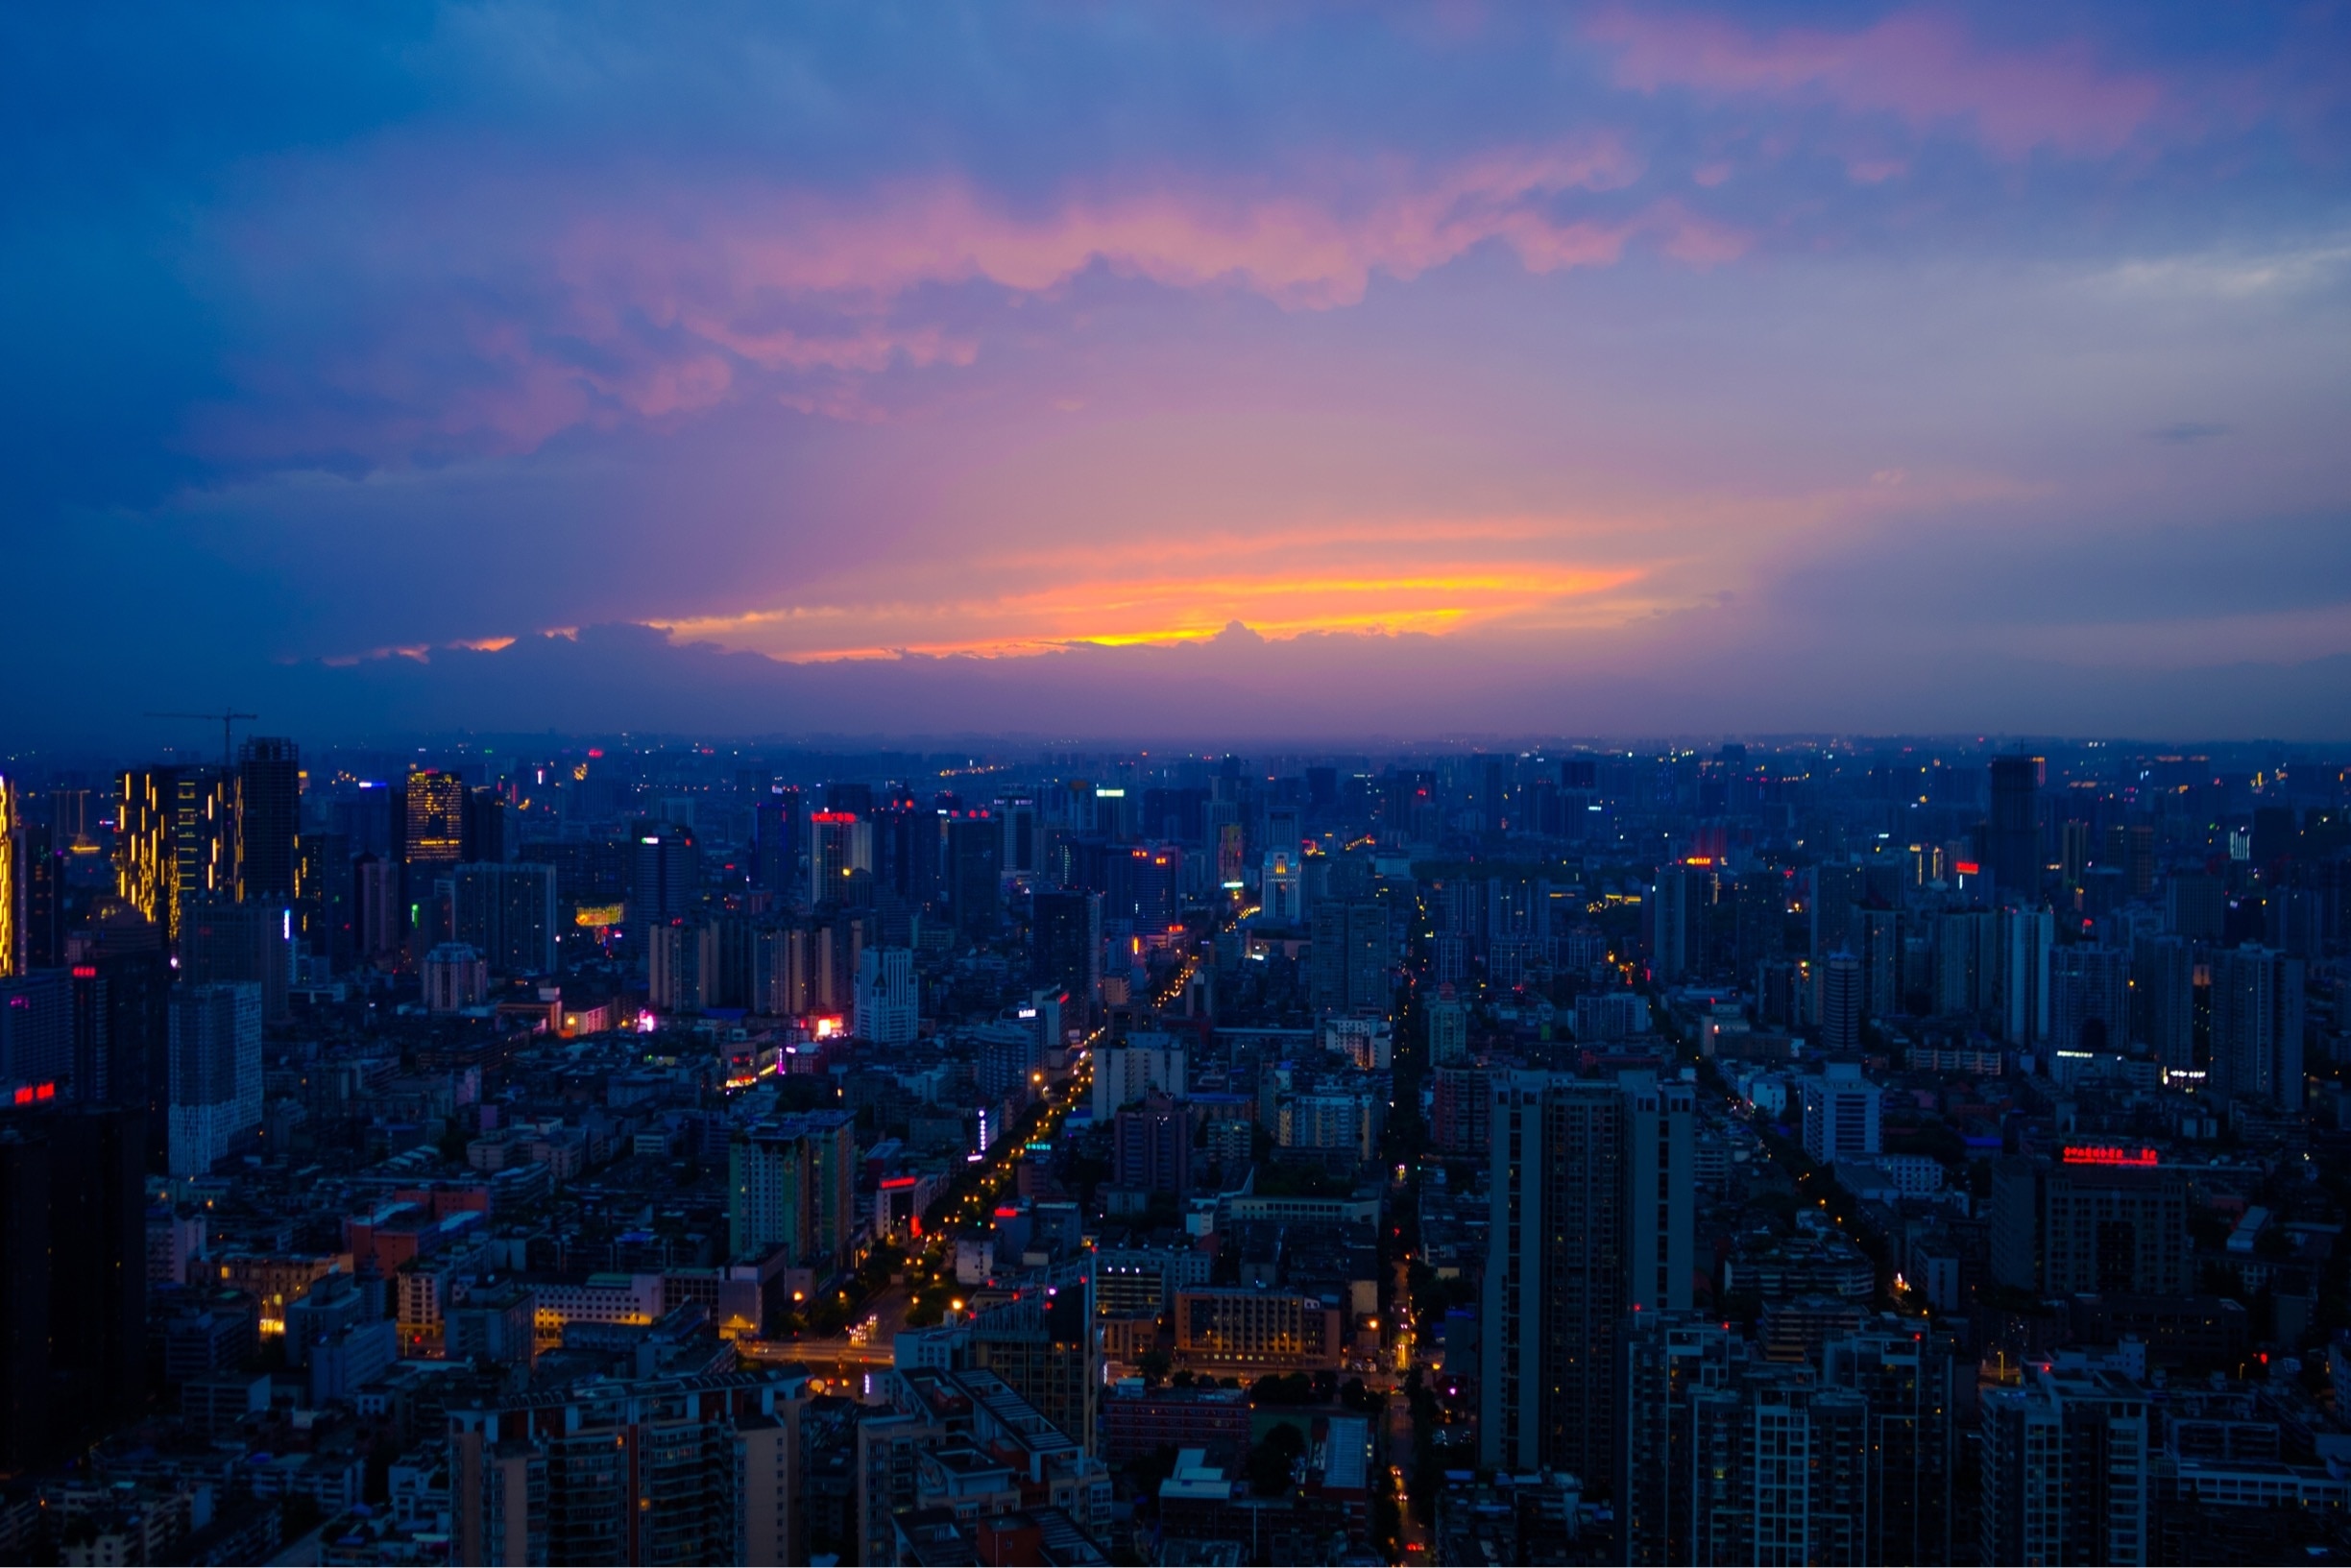 The tallest structure in Chengdu, and the best view during sunset of the city from Chengdu 339
#sunset #city #chengdu 